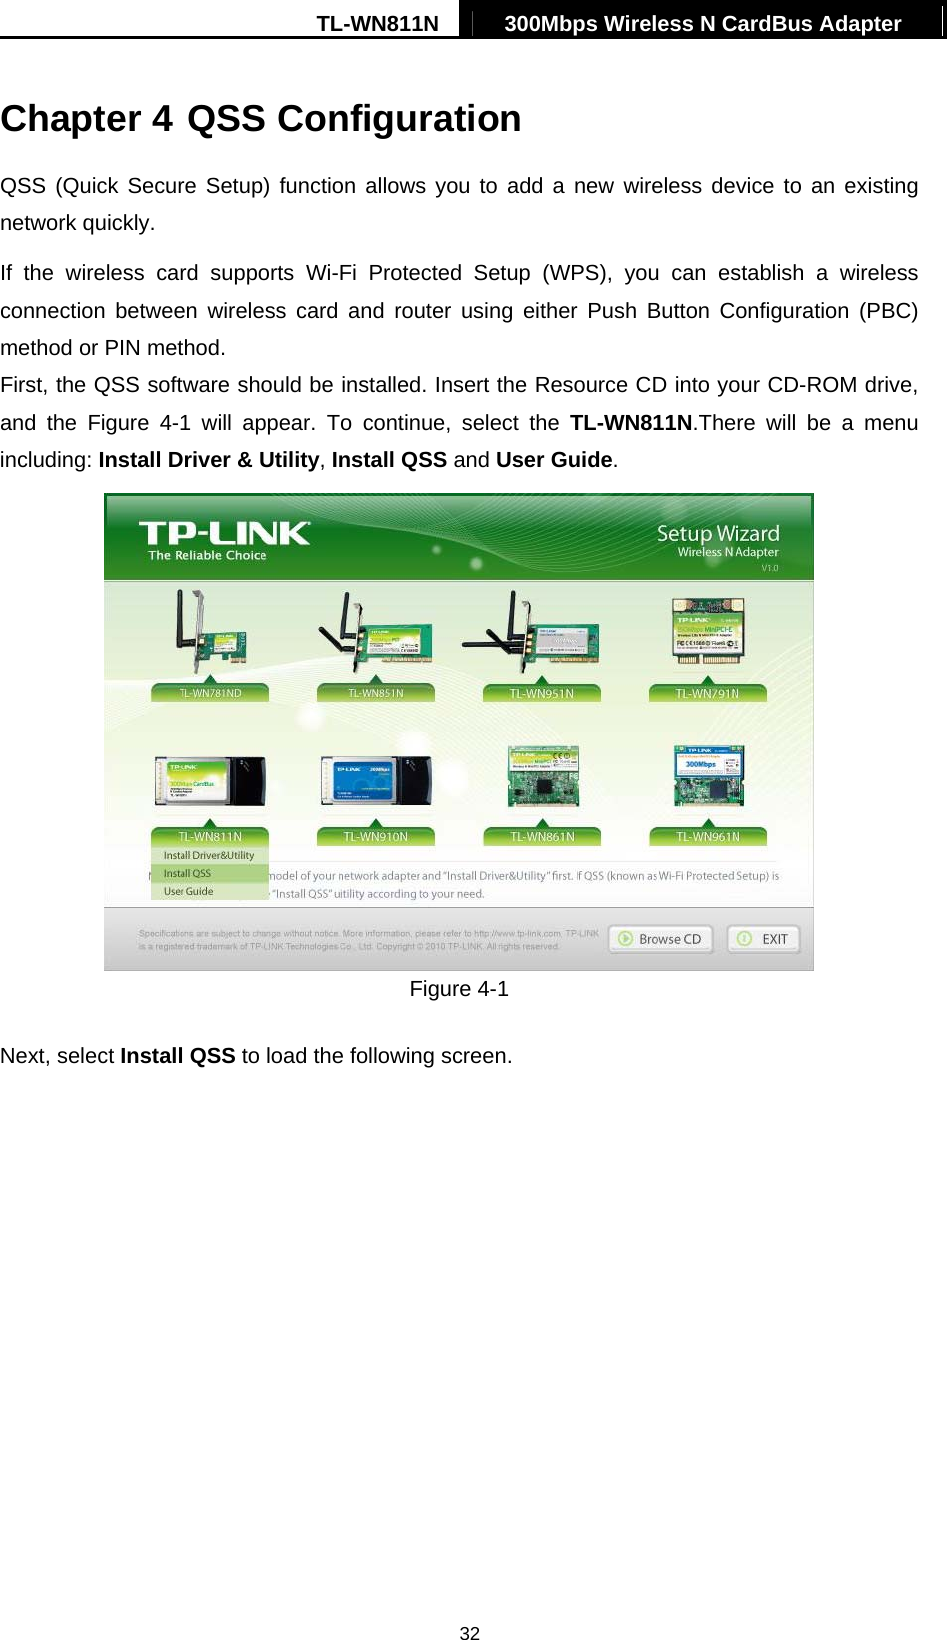 TL-WN811N  300Mbps Wireless N CardBus Adapter   32Chapter 4 QSS Configuration QSS (Quick Secure Setup) function allows you to add a new wireless device to an existing network quickly. If the wireless card supports Wi-Fi Protected Setup (WPS), you can establish a wireless connection between wireless card and router using either Push Button Configuration (PBC) method or PIN method. First, the QSS software should be installed. Insert the Resource CD into your CD-ROM drive, and the Figure 4-1 will appear. To continue, select the TL-WN811N.There will be a menu including: Install Driver &amp; Utility, Install QSS and User Guide.  Figure 4-1 Next, select Install QSS to load the following screen. 